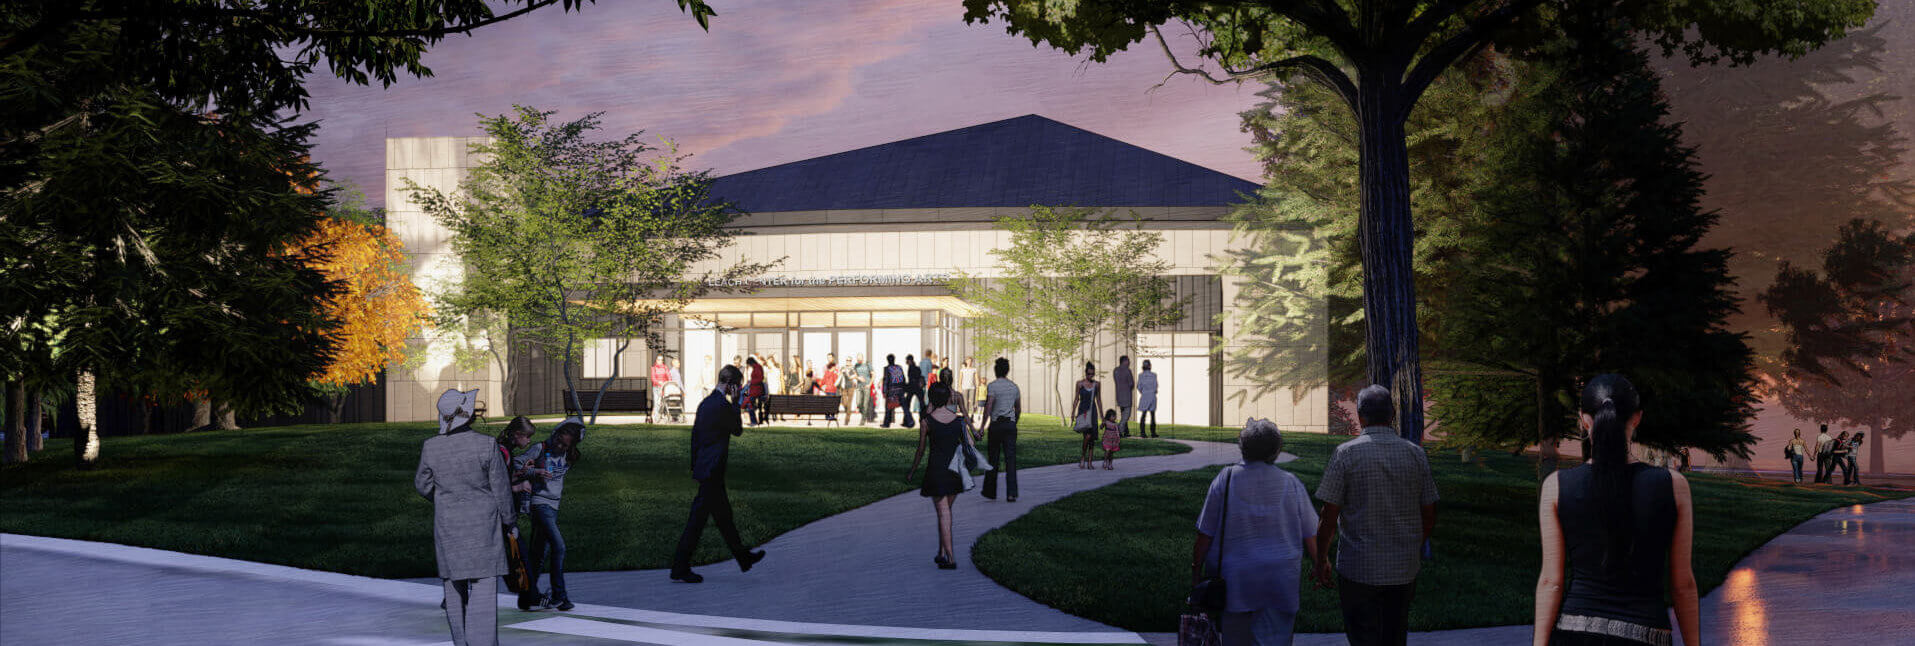 Rendering of Colorado Academy’s Leach Center for the Performing Arts.